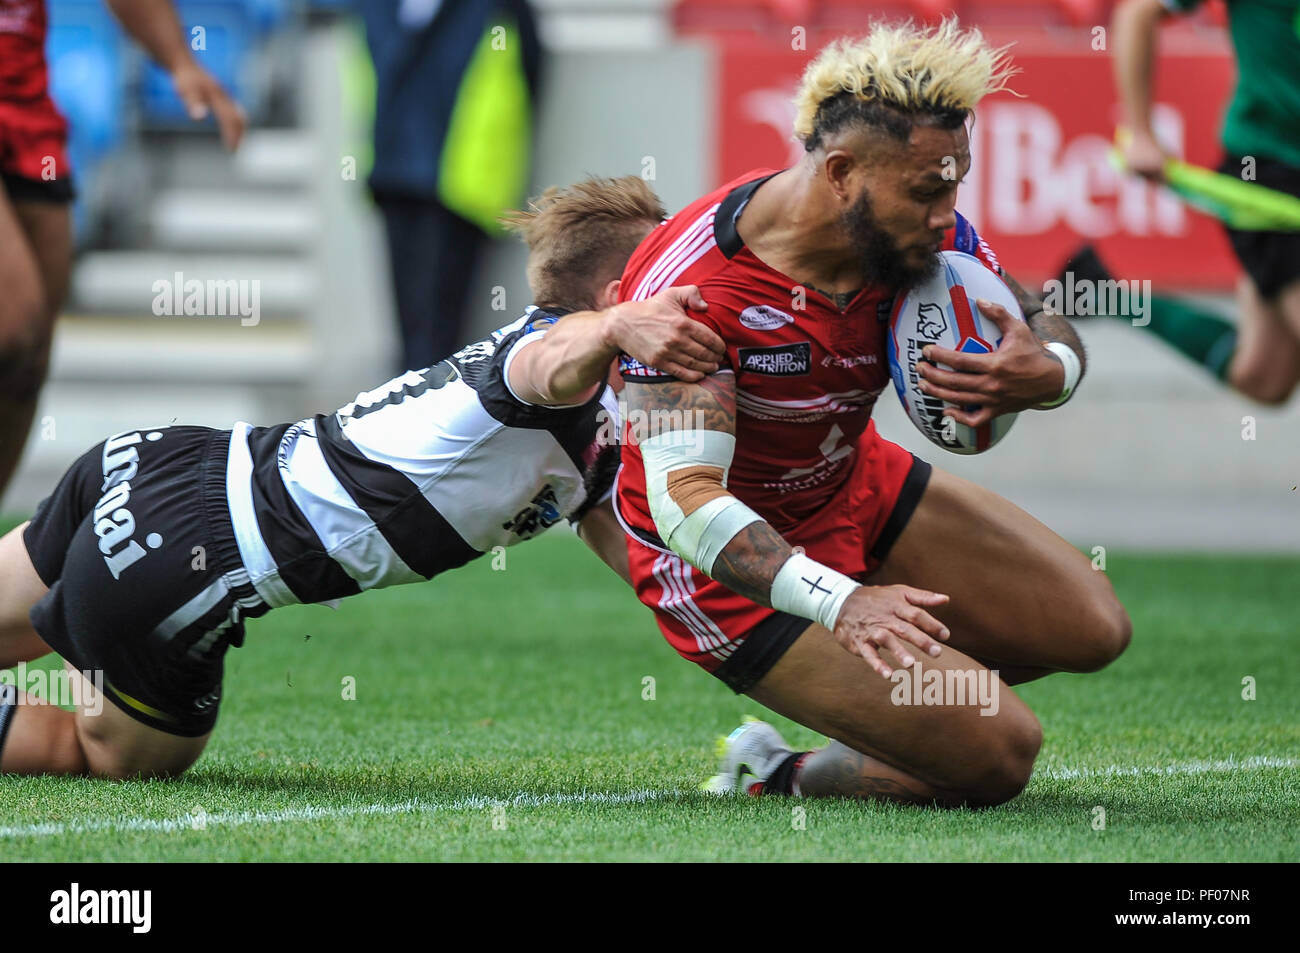 Salford, UK. 18th August 2018. Rugby League Super 8's Salford Red Devils vs Widnes Vikings ;  Salford Red DevilsÕ Junior SaÕu goes over for his second try at the AJ Bell Stadium, Salford, UK.  Dean Williams Credit: Dean Williams/Alamy Live News Stock Photo